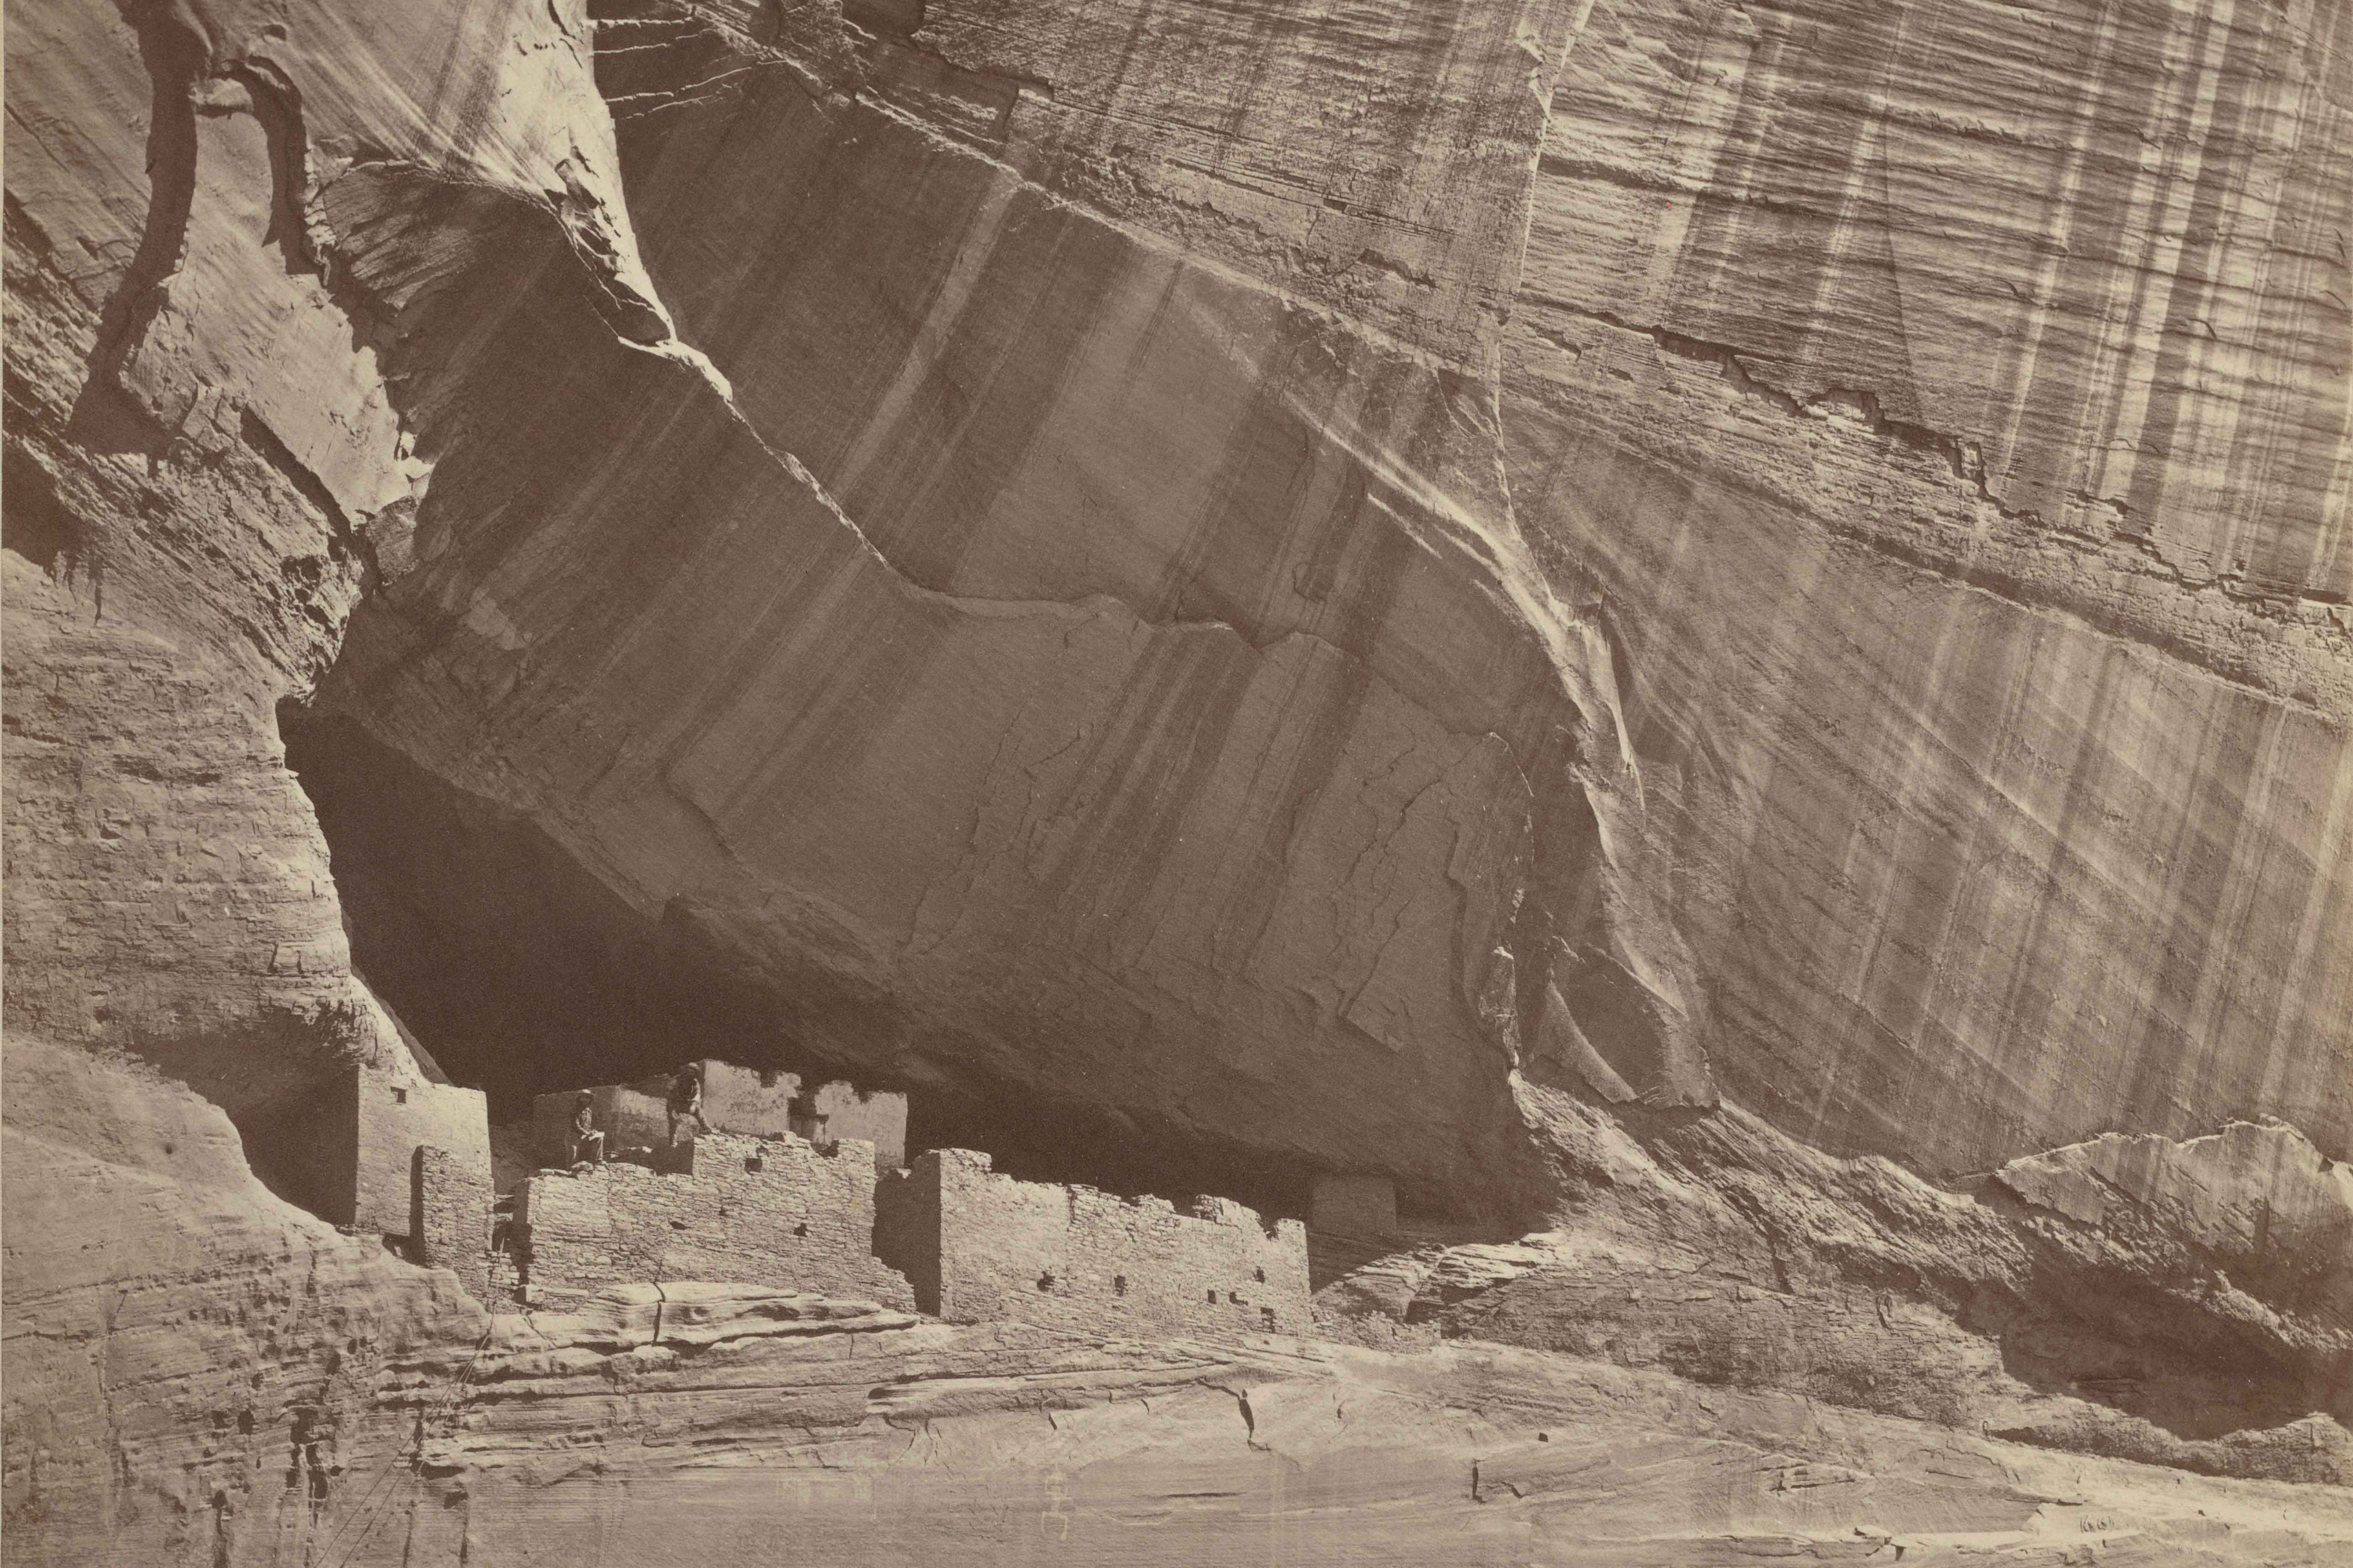 Timothy H. O’Sullivan (American, b. Ireland, about 1840–1882), Ancient Ruins in the Cañon de Chelle, N.M., detail, 1873, albumen silver print. Bank of America Collection